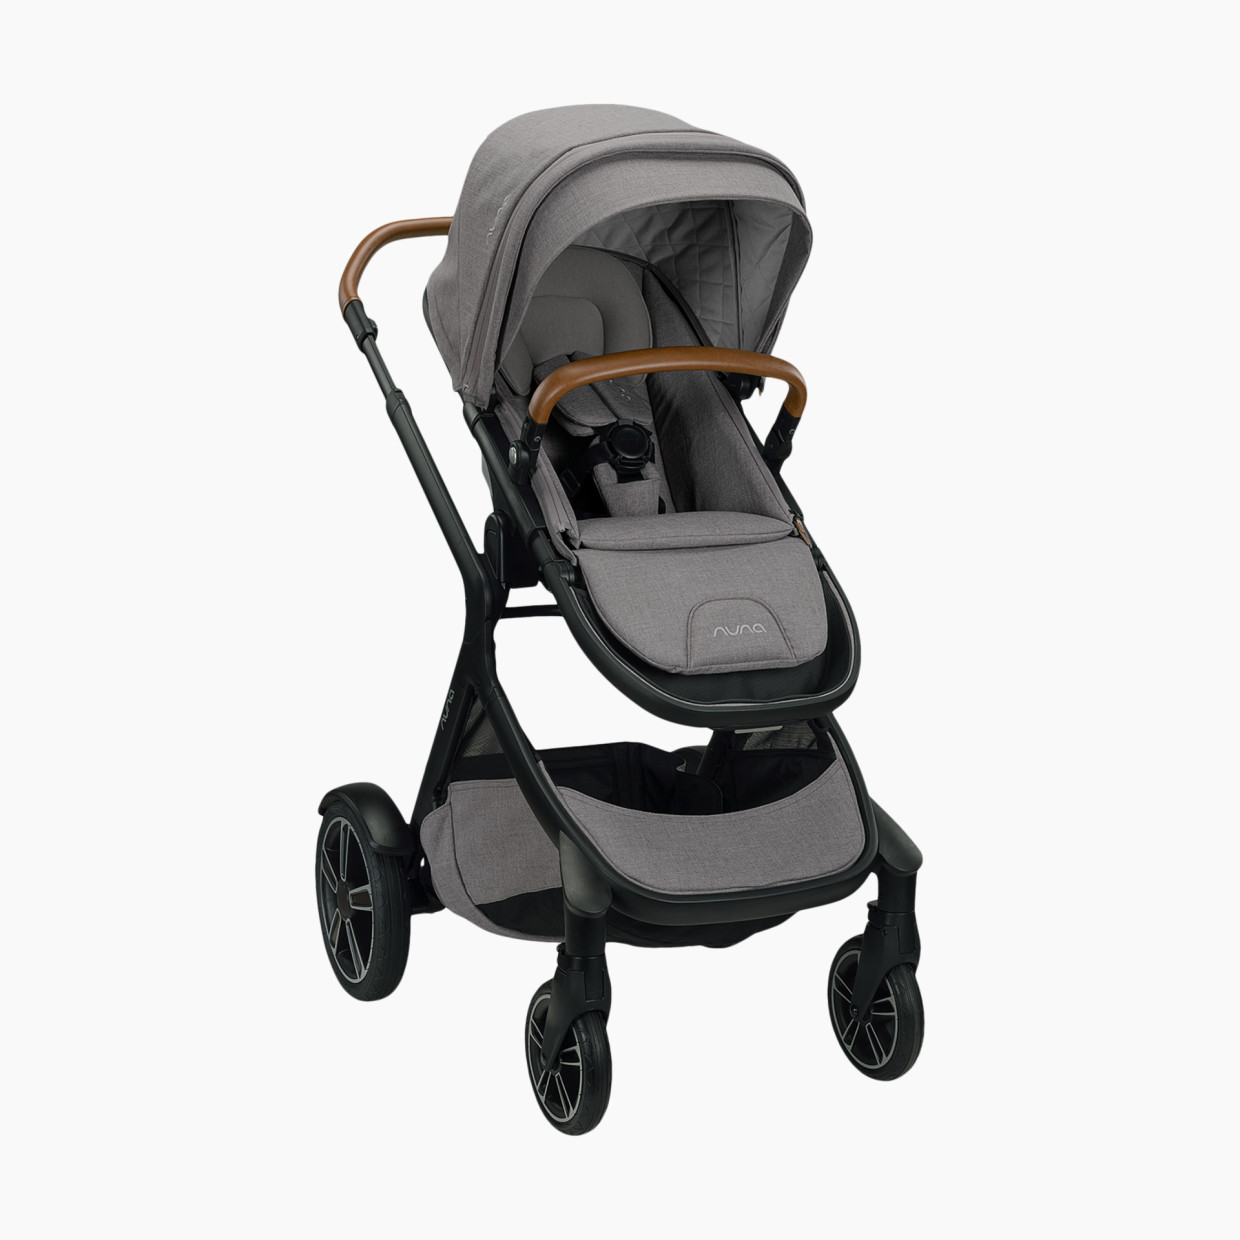 Nuna DEMI Grow Stroller with MagneTech Secure Snap - Frost.